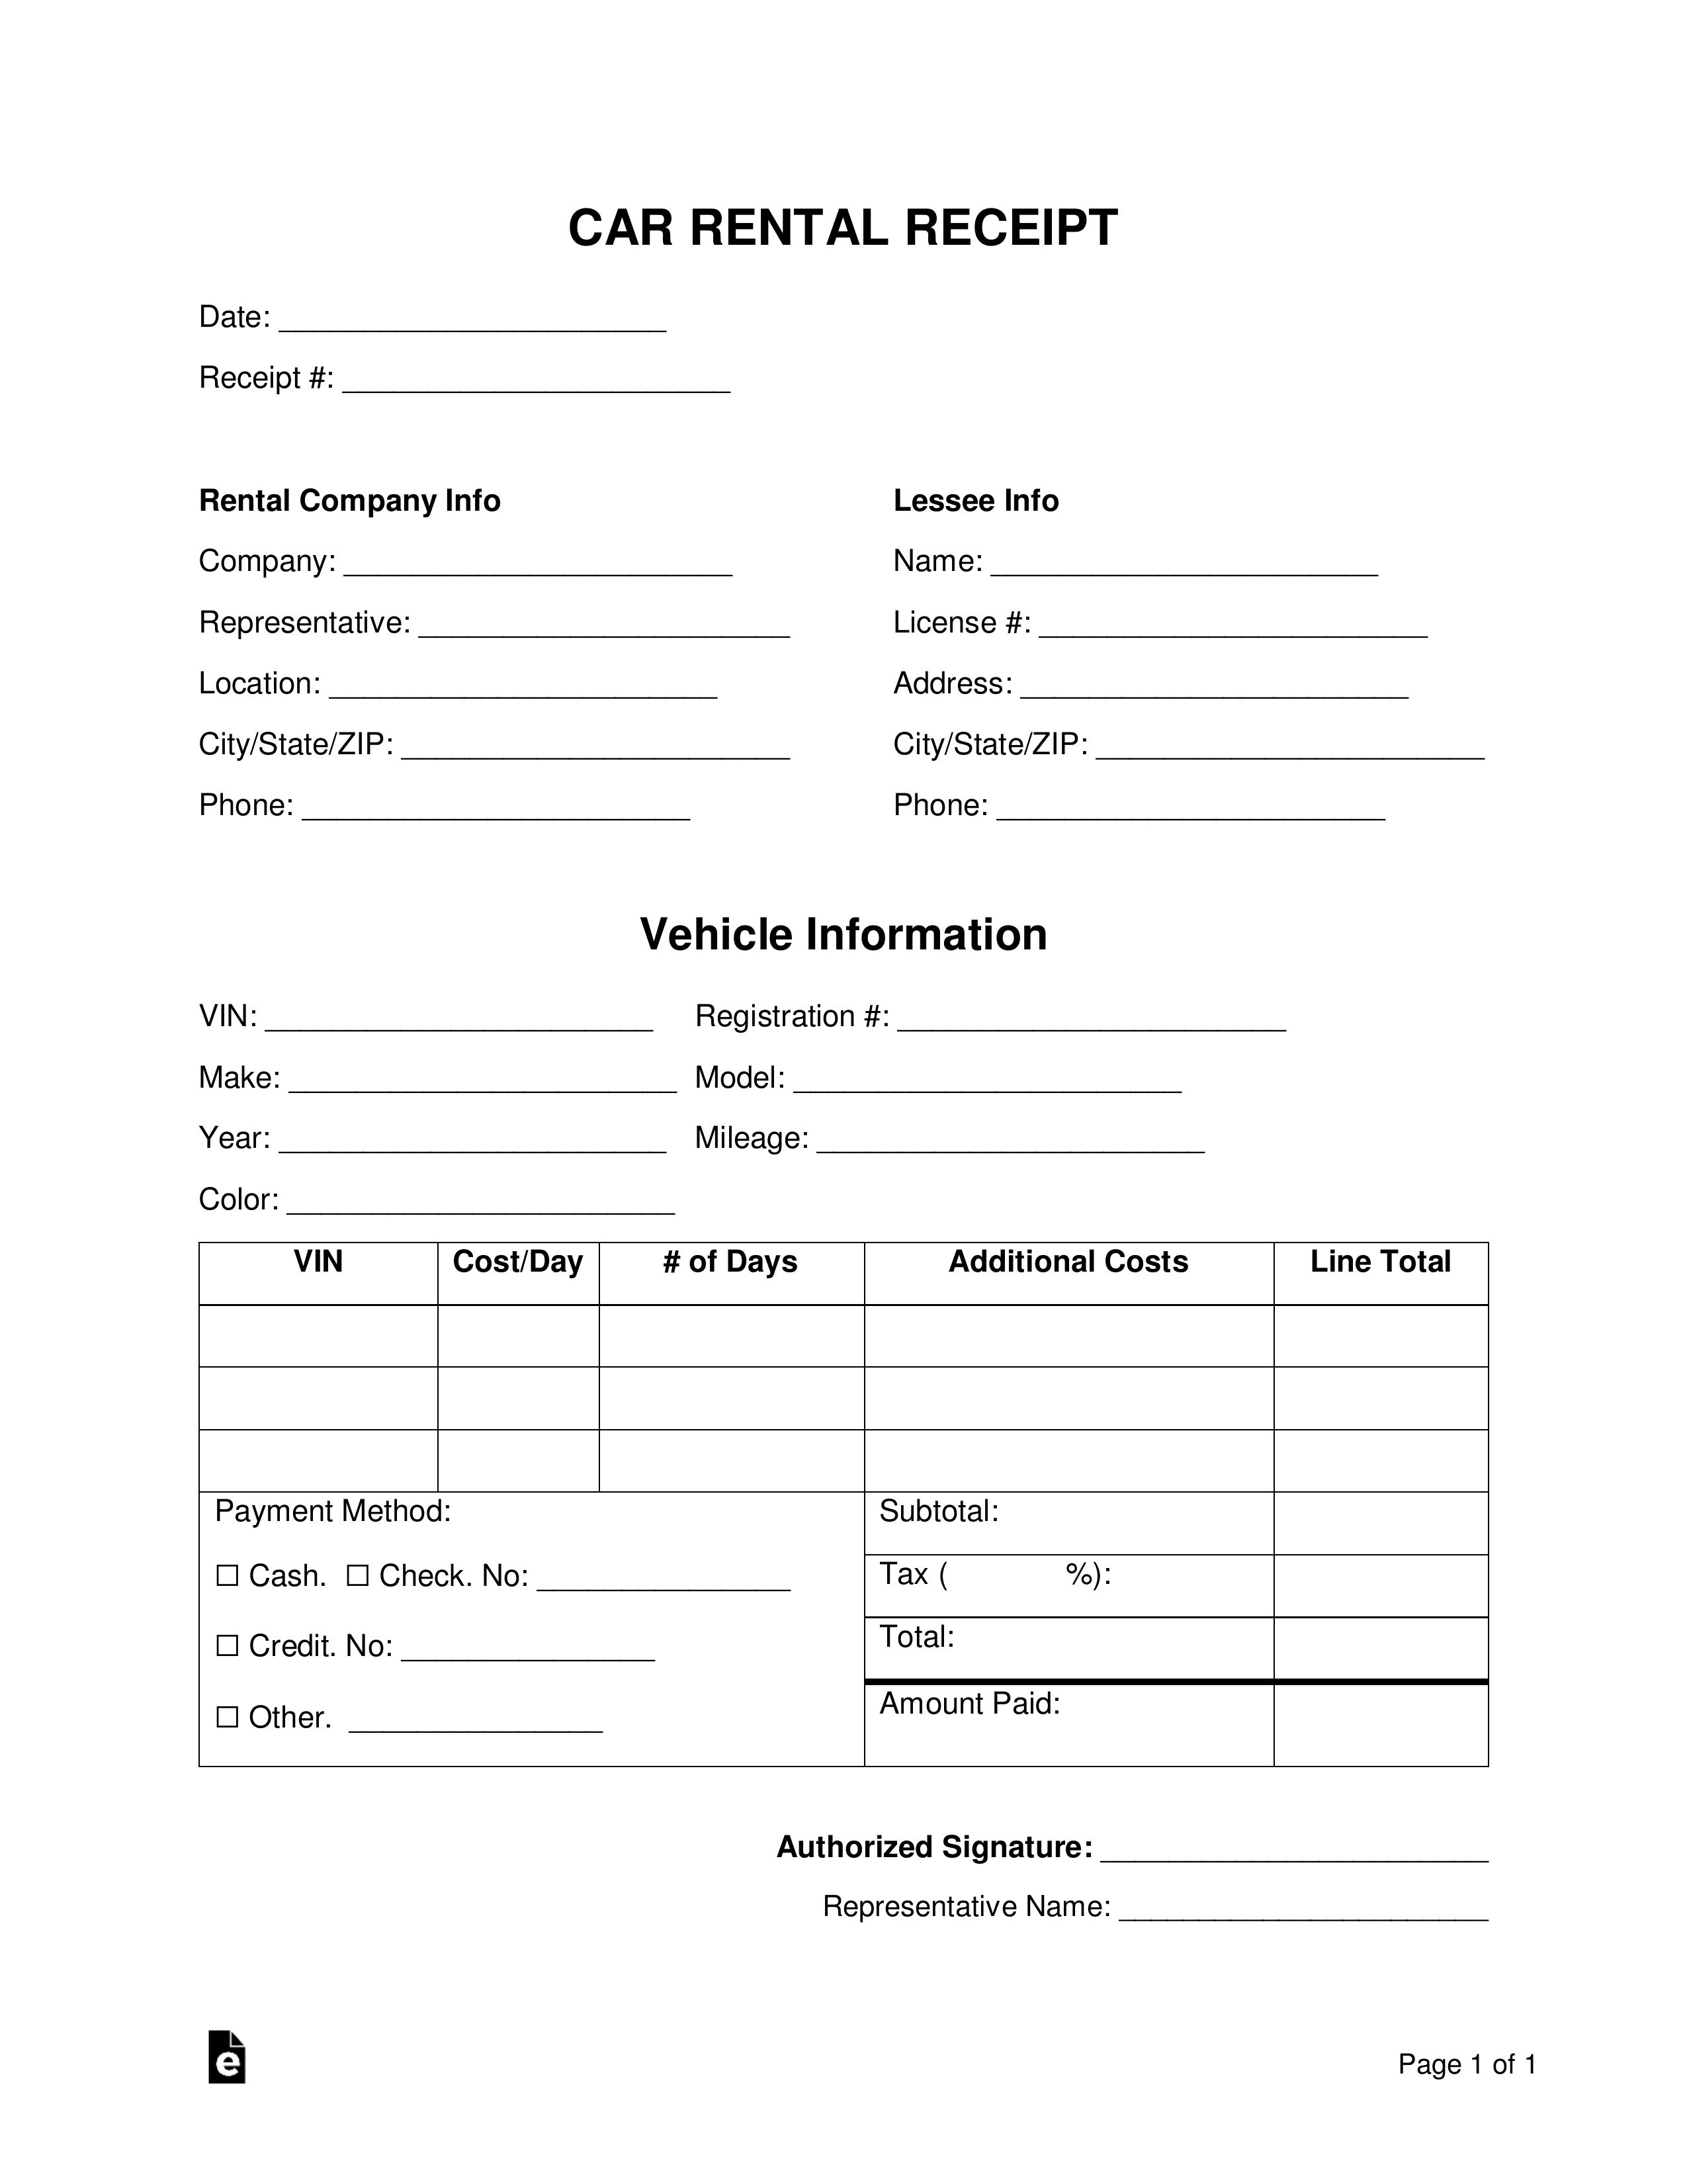 free car rental receipt template word pdf eforms car hired service receipt samples